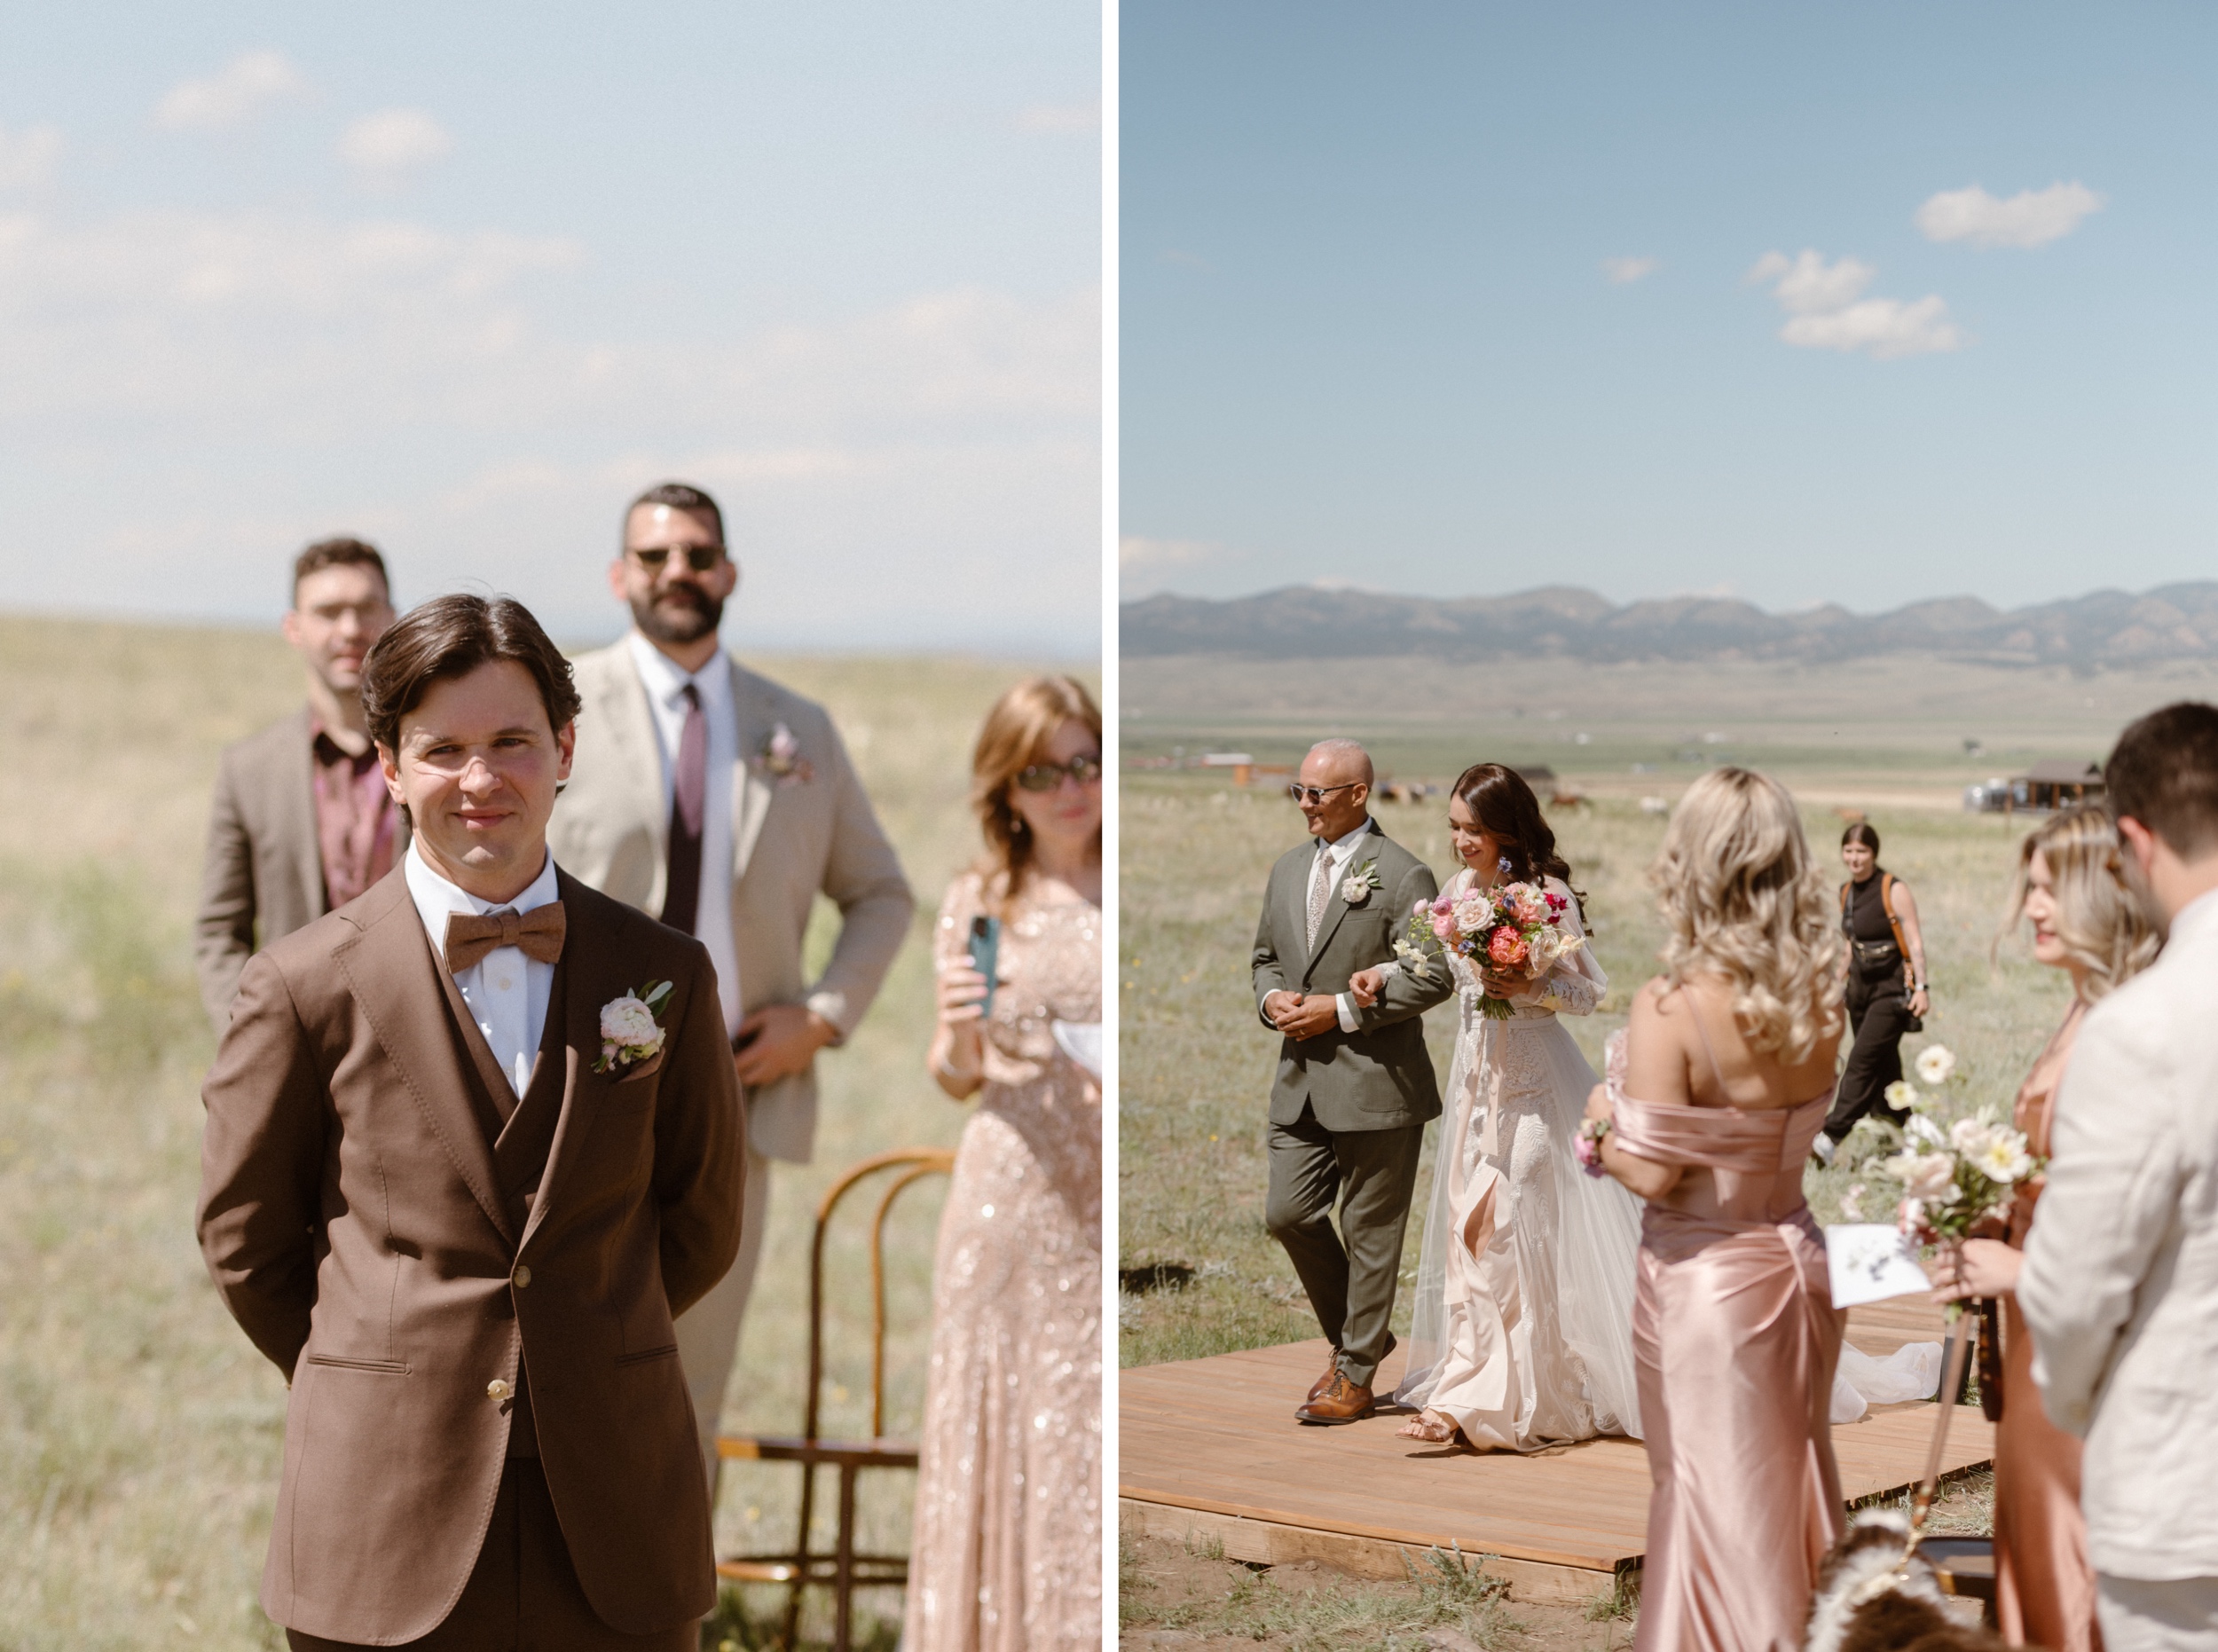 Two photos side by side of a groom waiting for his bride and the bride walking to her groom at the ceremony site at Three Peaks Ranch. Photo by Colorado wedding photographer Ashley Joyce.